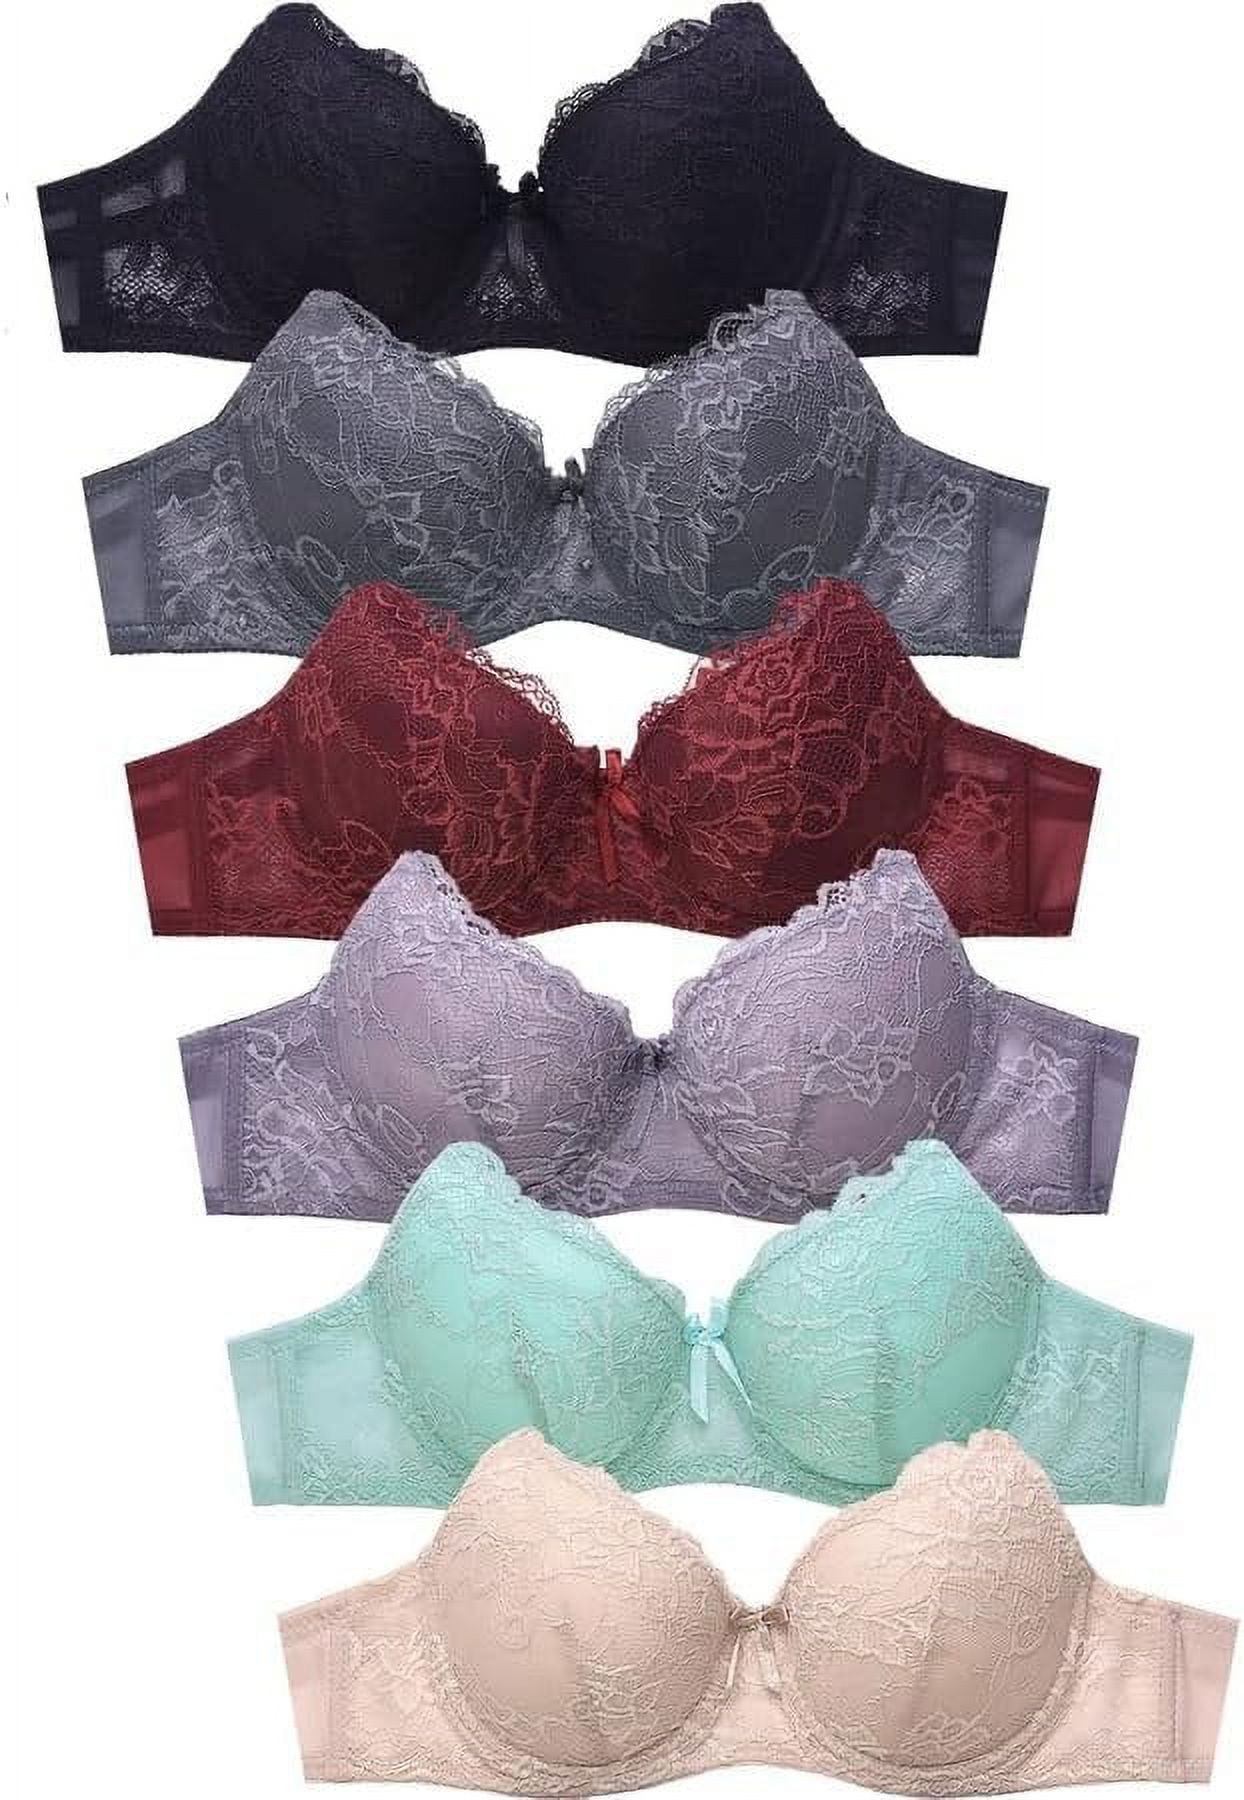 Women's Basic Plain Lace Bras Petite to Plus Size Pack of 6- Various Styles  